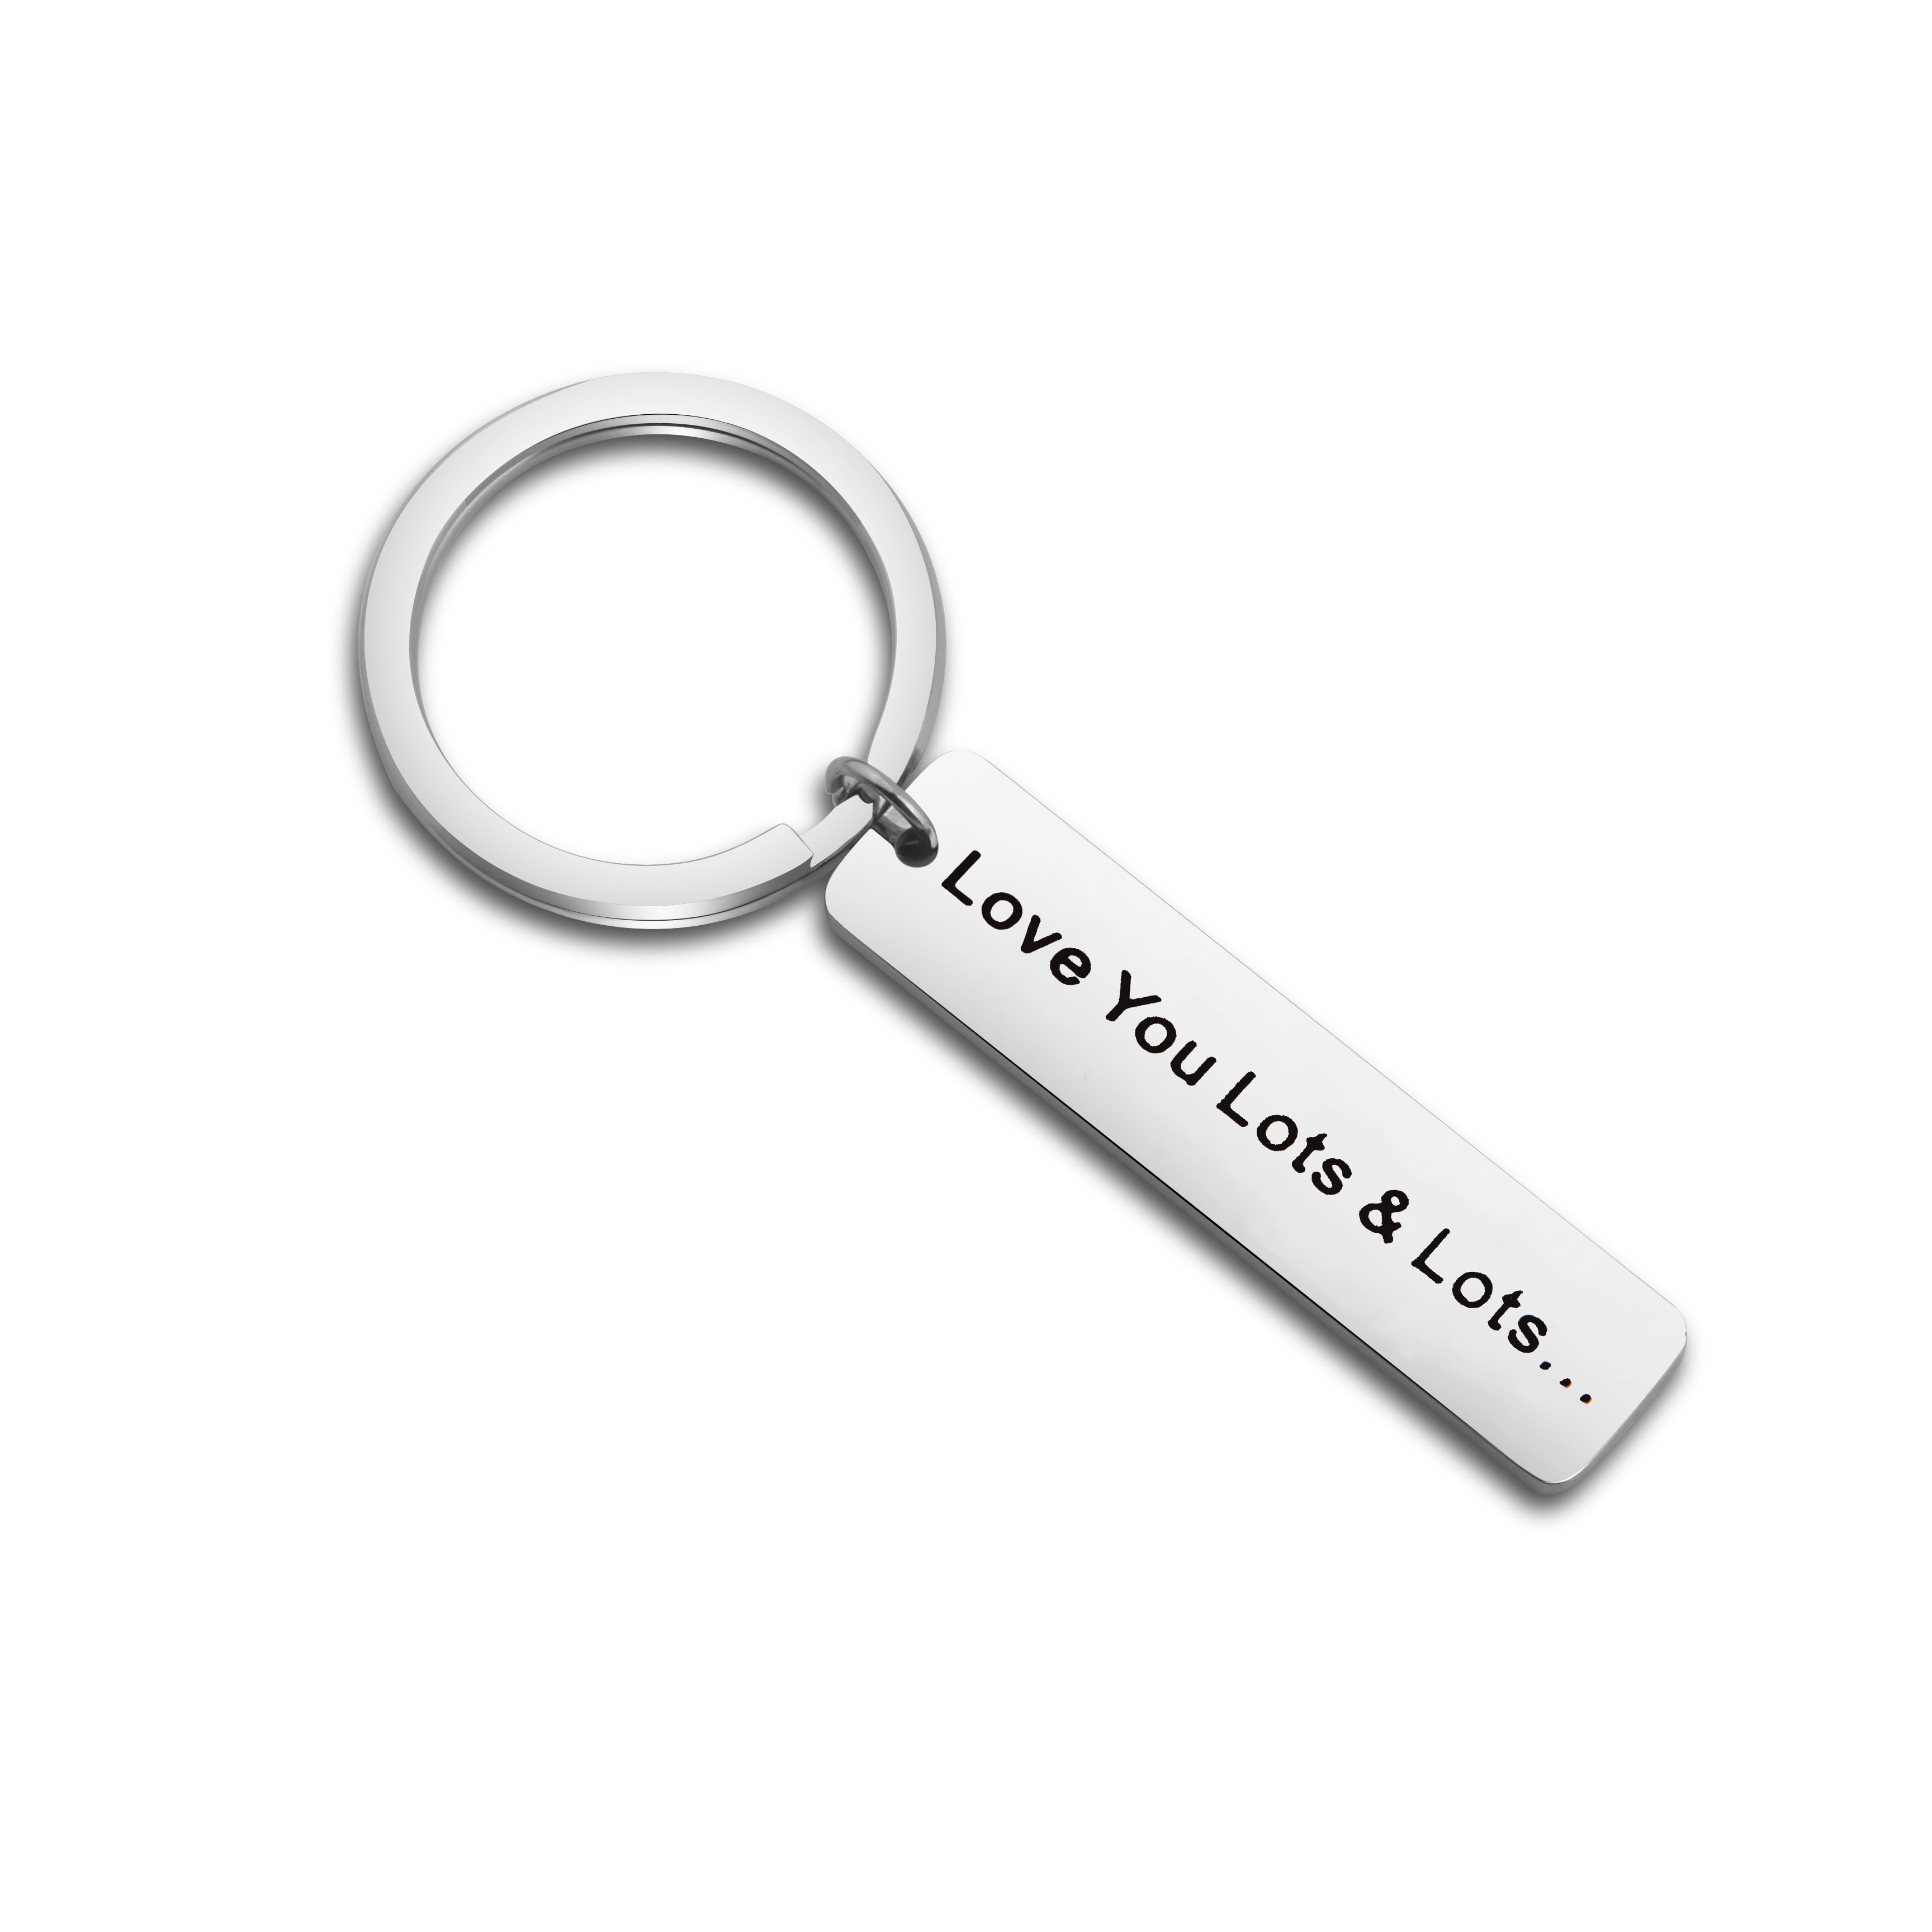 Personalised Initial Charm & Coin Keyring Birthday Gift For Him Or Her In Gift Bag